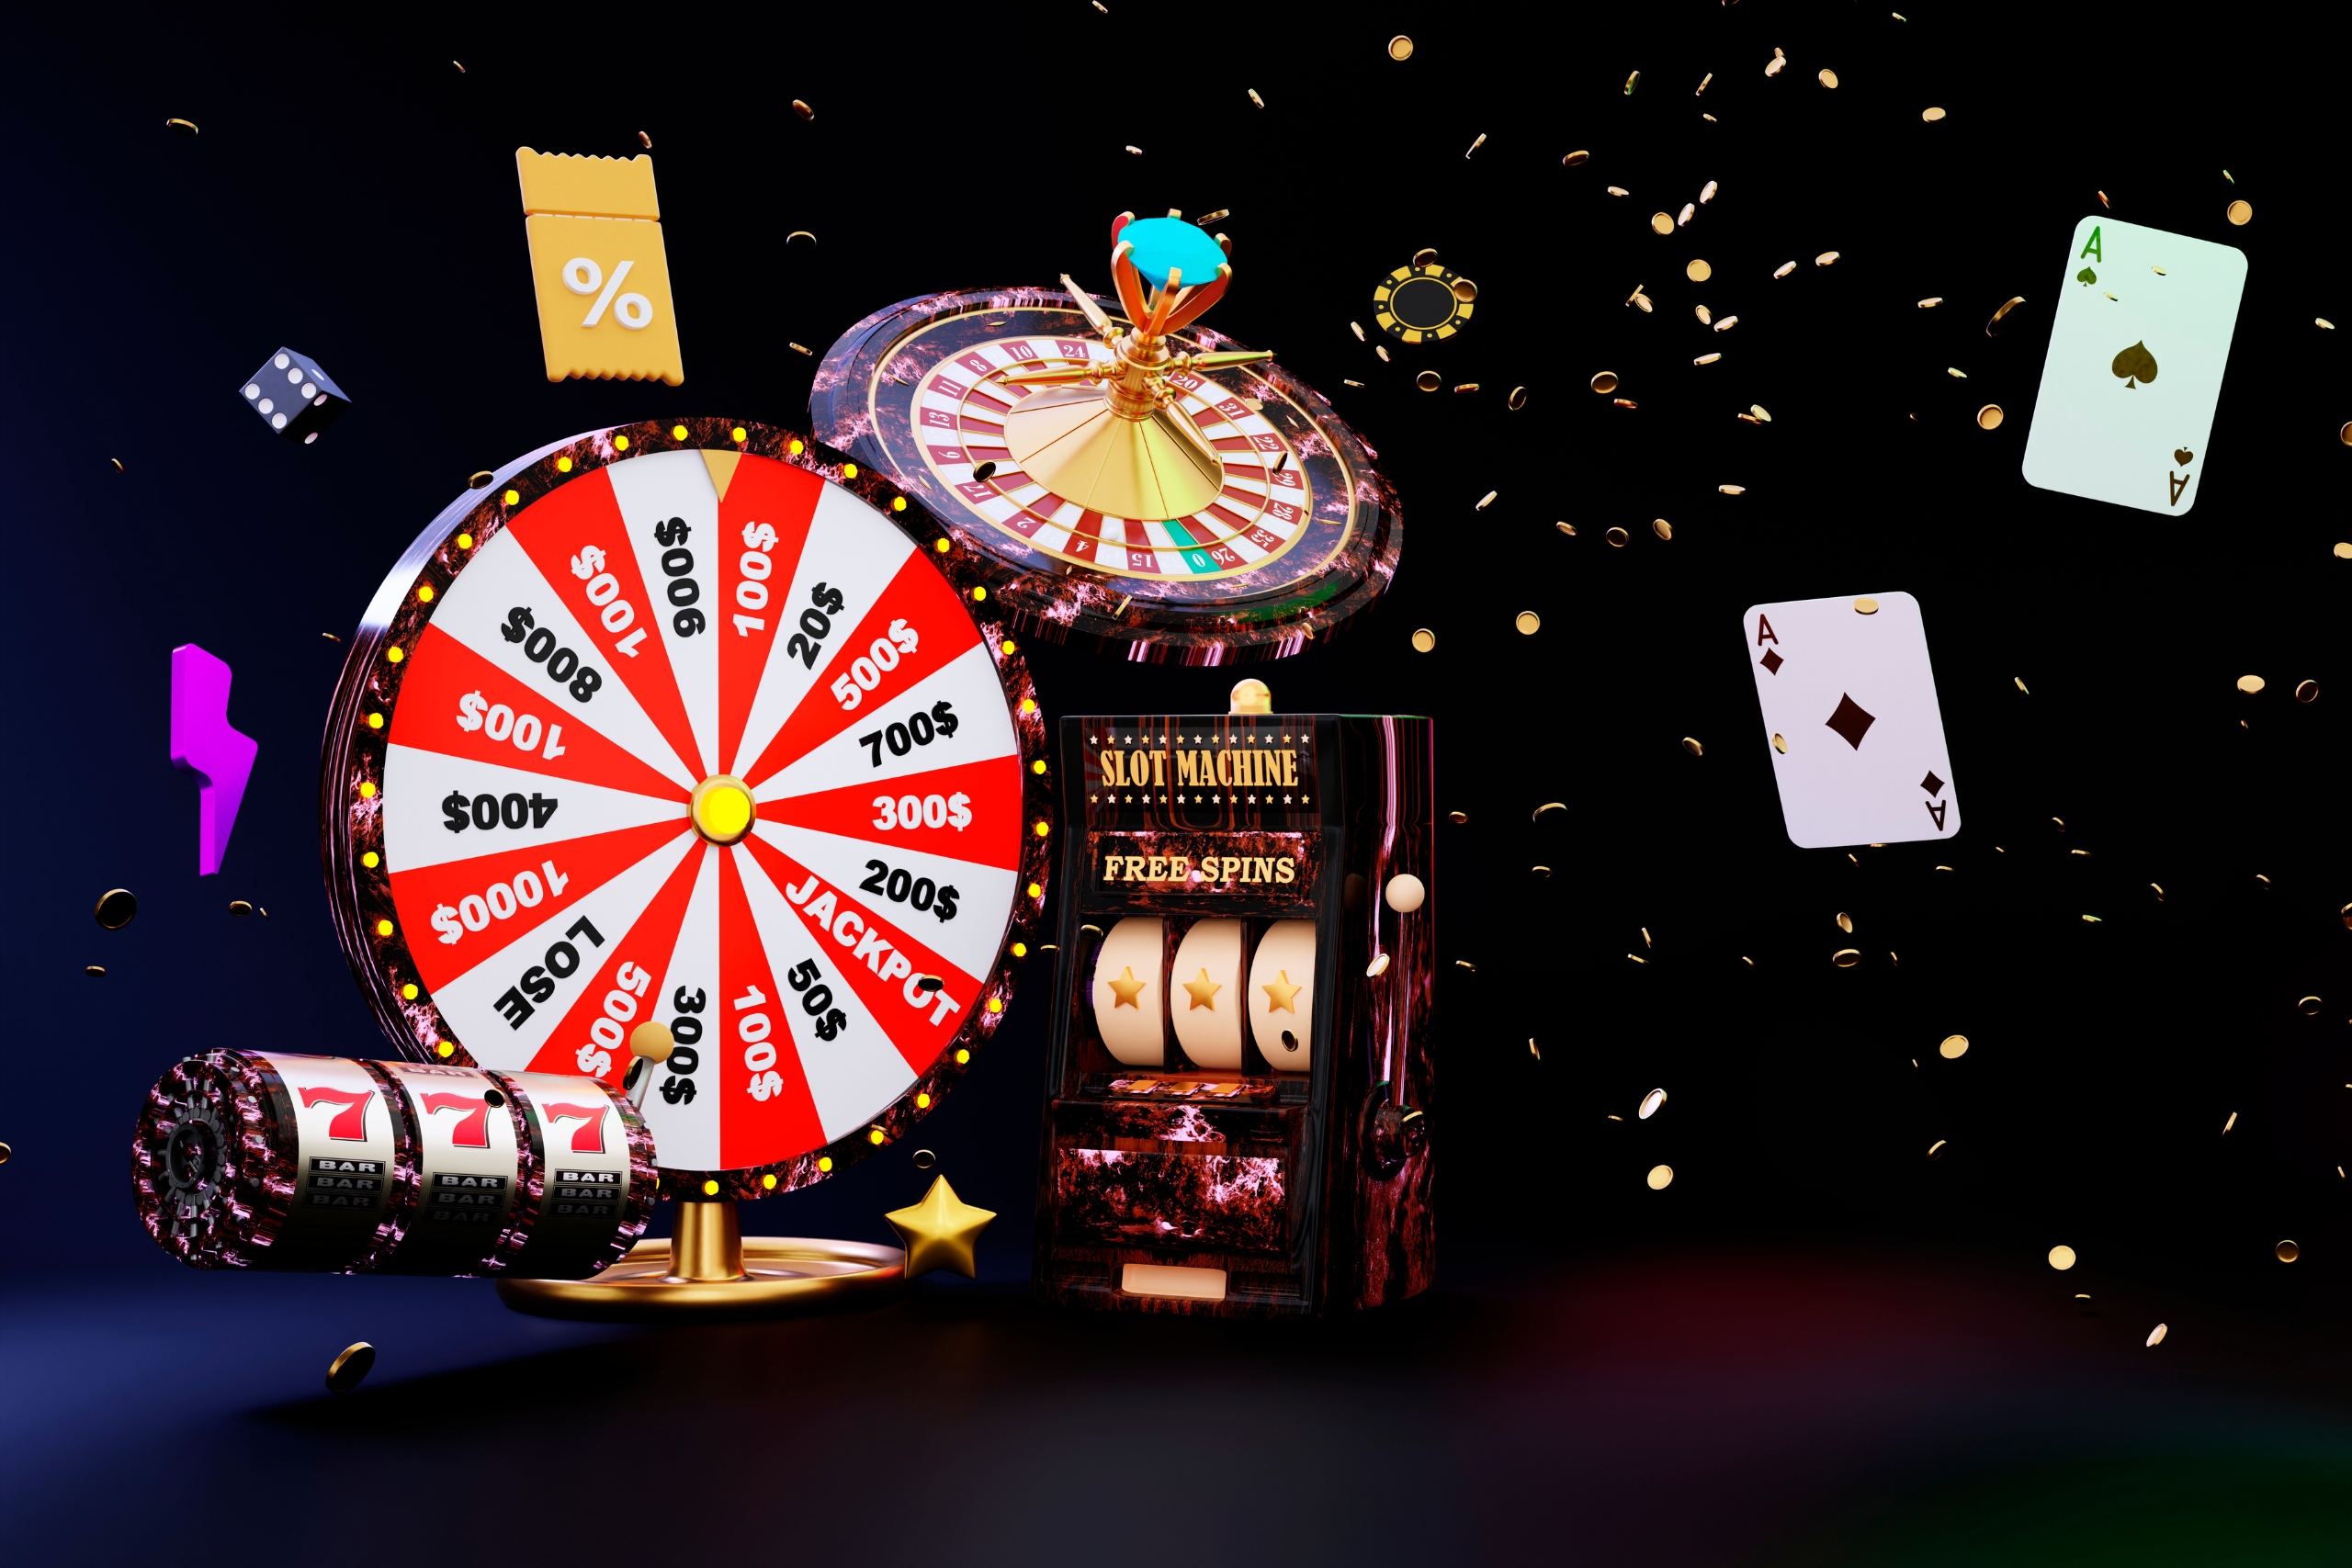 Online casino. 3D realistic roulette wheel and slot machine